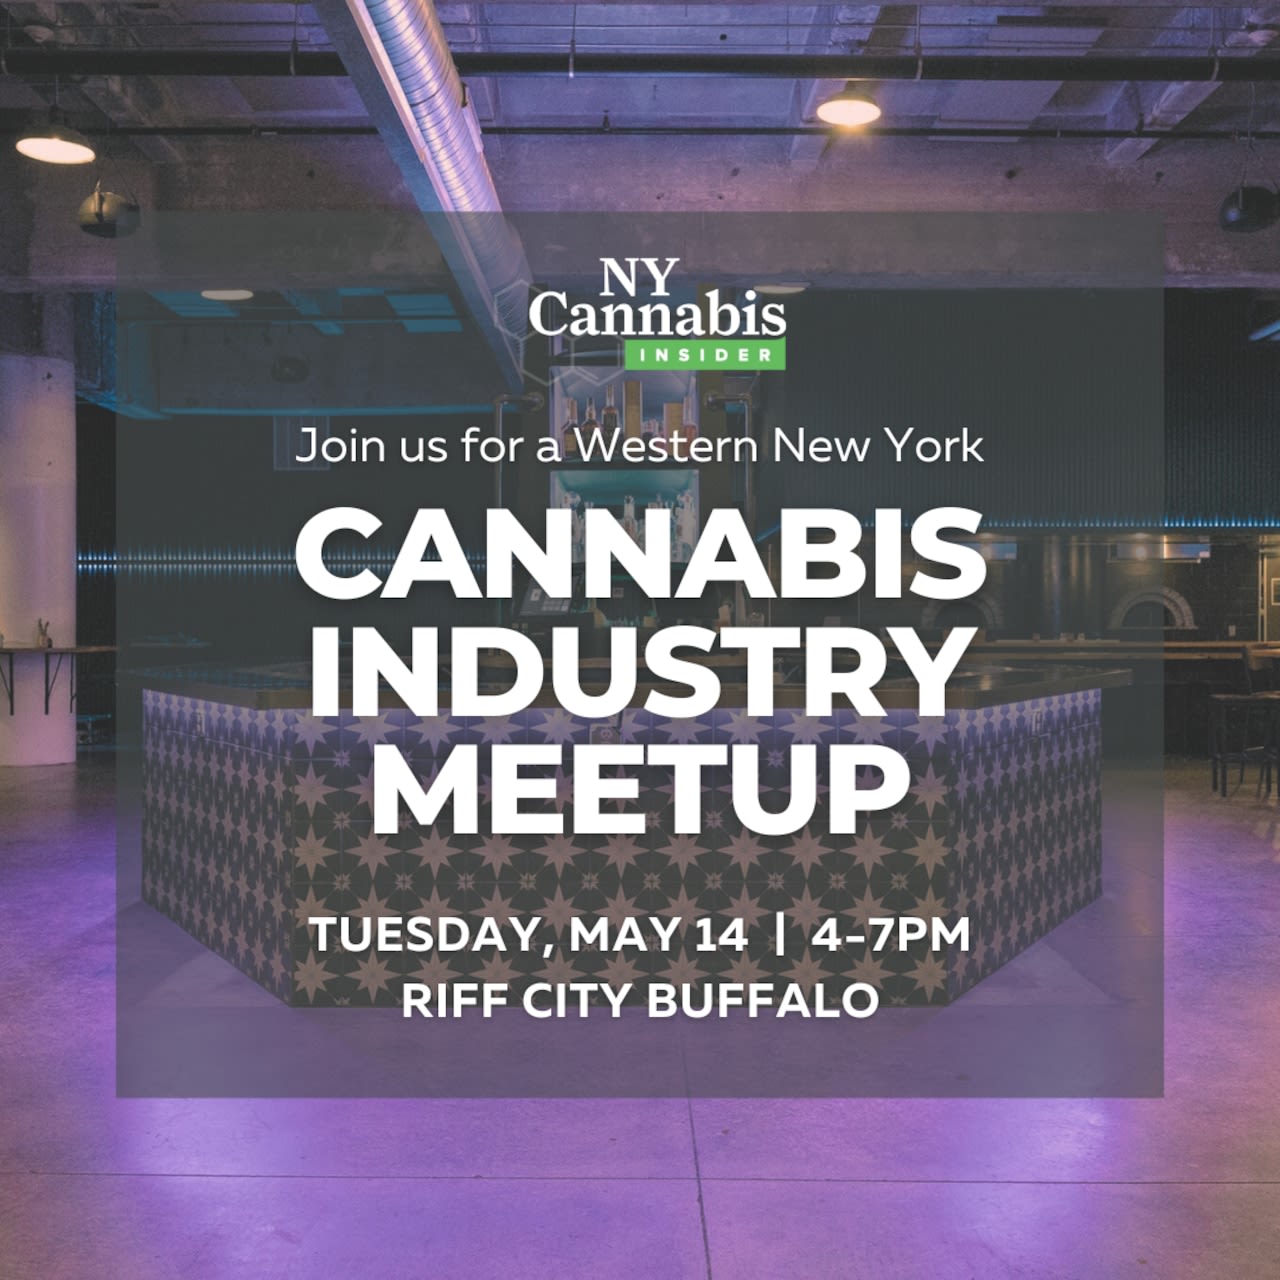 Interactive “state of the state” of the cannabis industry event being held in Buffalo